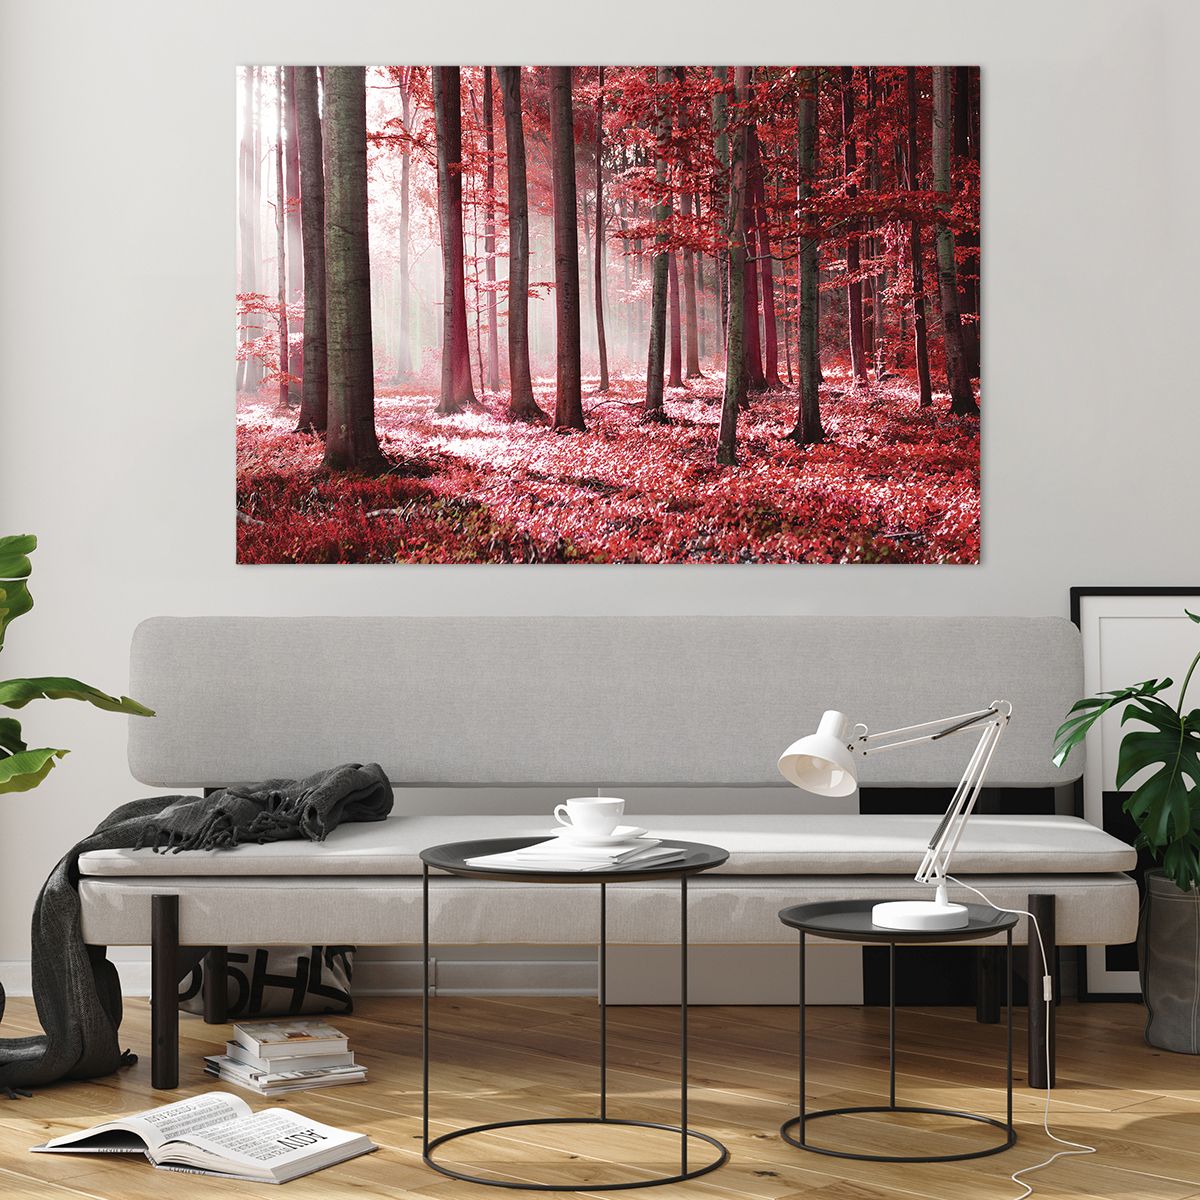 Glass picture  Landscape, Glass picture  Forest, Glass picture  Trees, Glass picture  Nature, Glass picture  Red Leaves